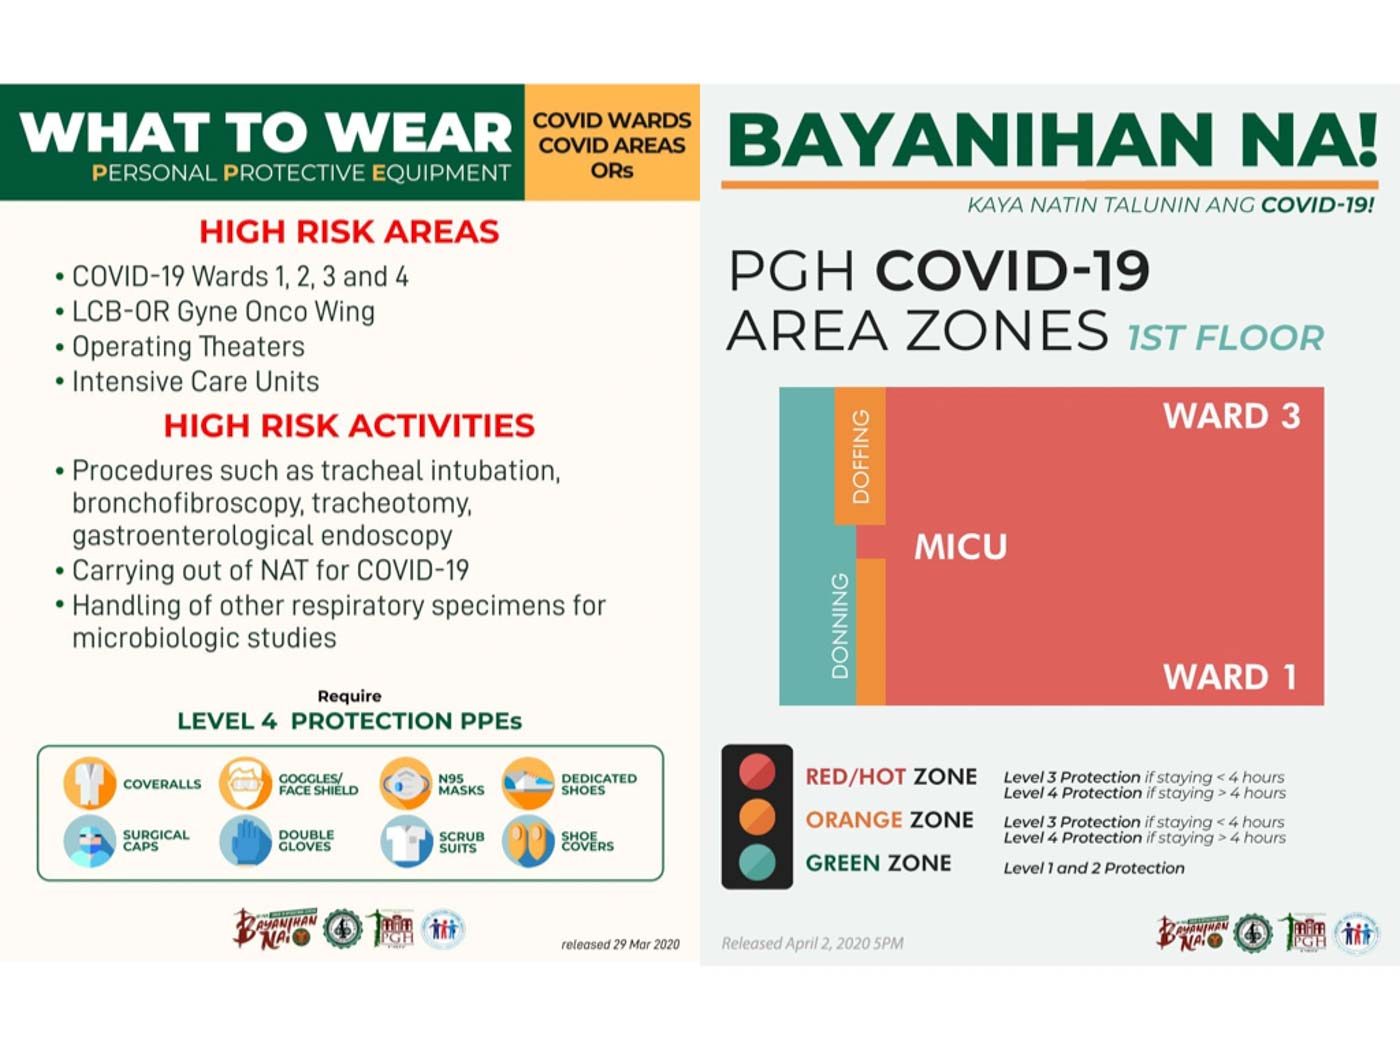 ZONING. Infographics clearly identify zones within COVID-19 areas and the level of PPE protection required inside PGH. Courtesy of Philippine General Hospital 